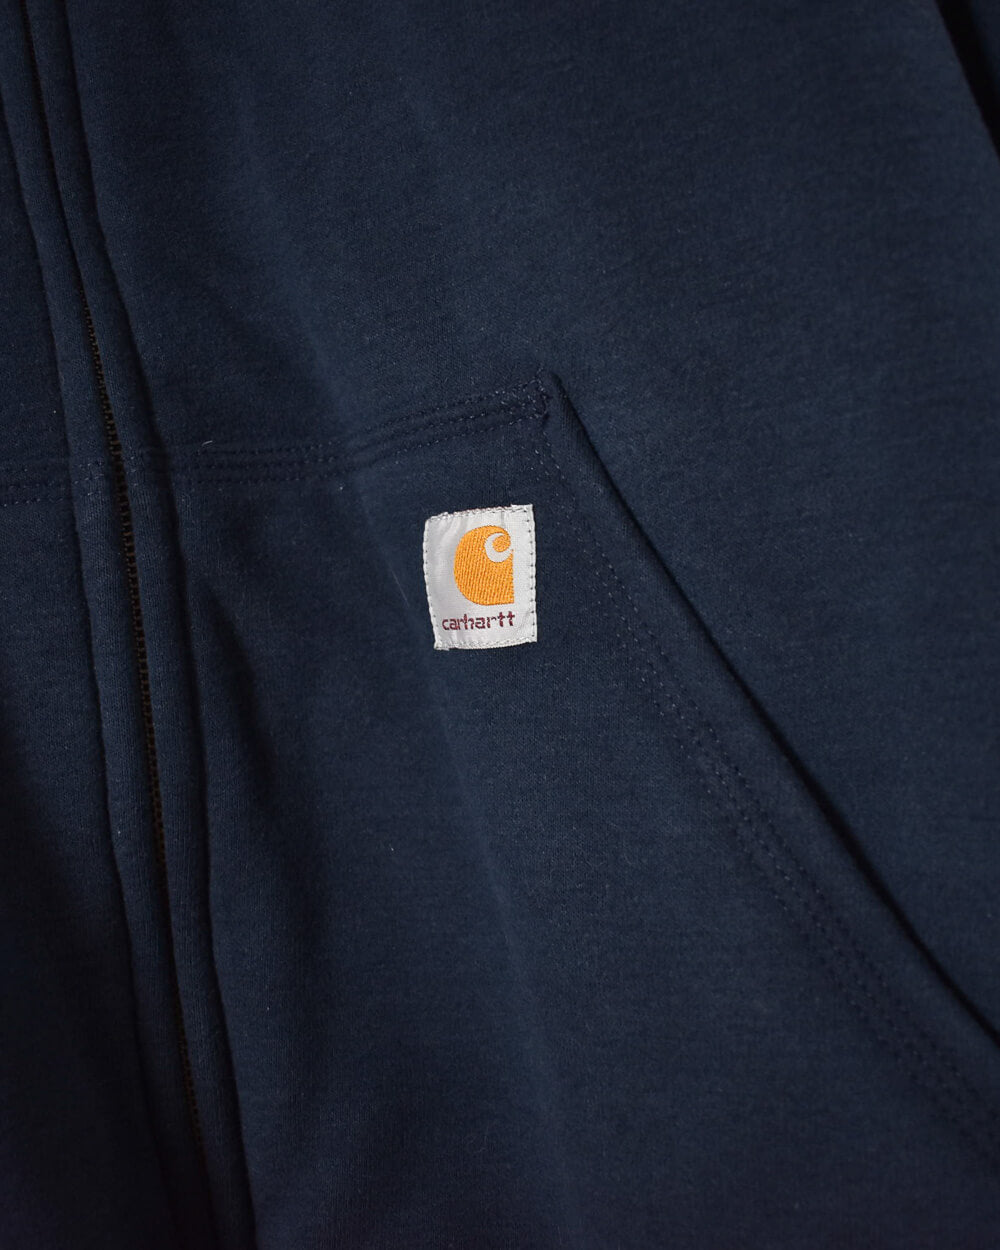 Carhartt Fleece-Lined Zip-Through Hoodie - X-Large - Domno Vintage 90s, 80s, 00s Retro and Vintage Clothing 